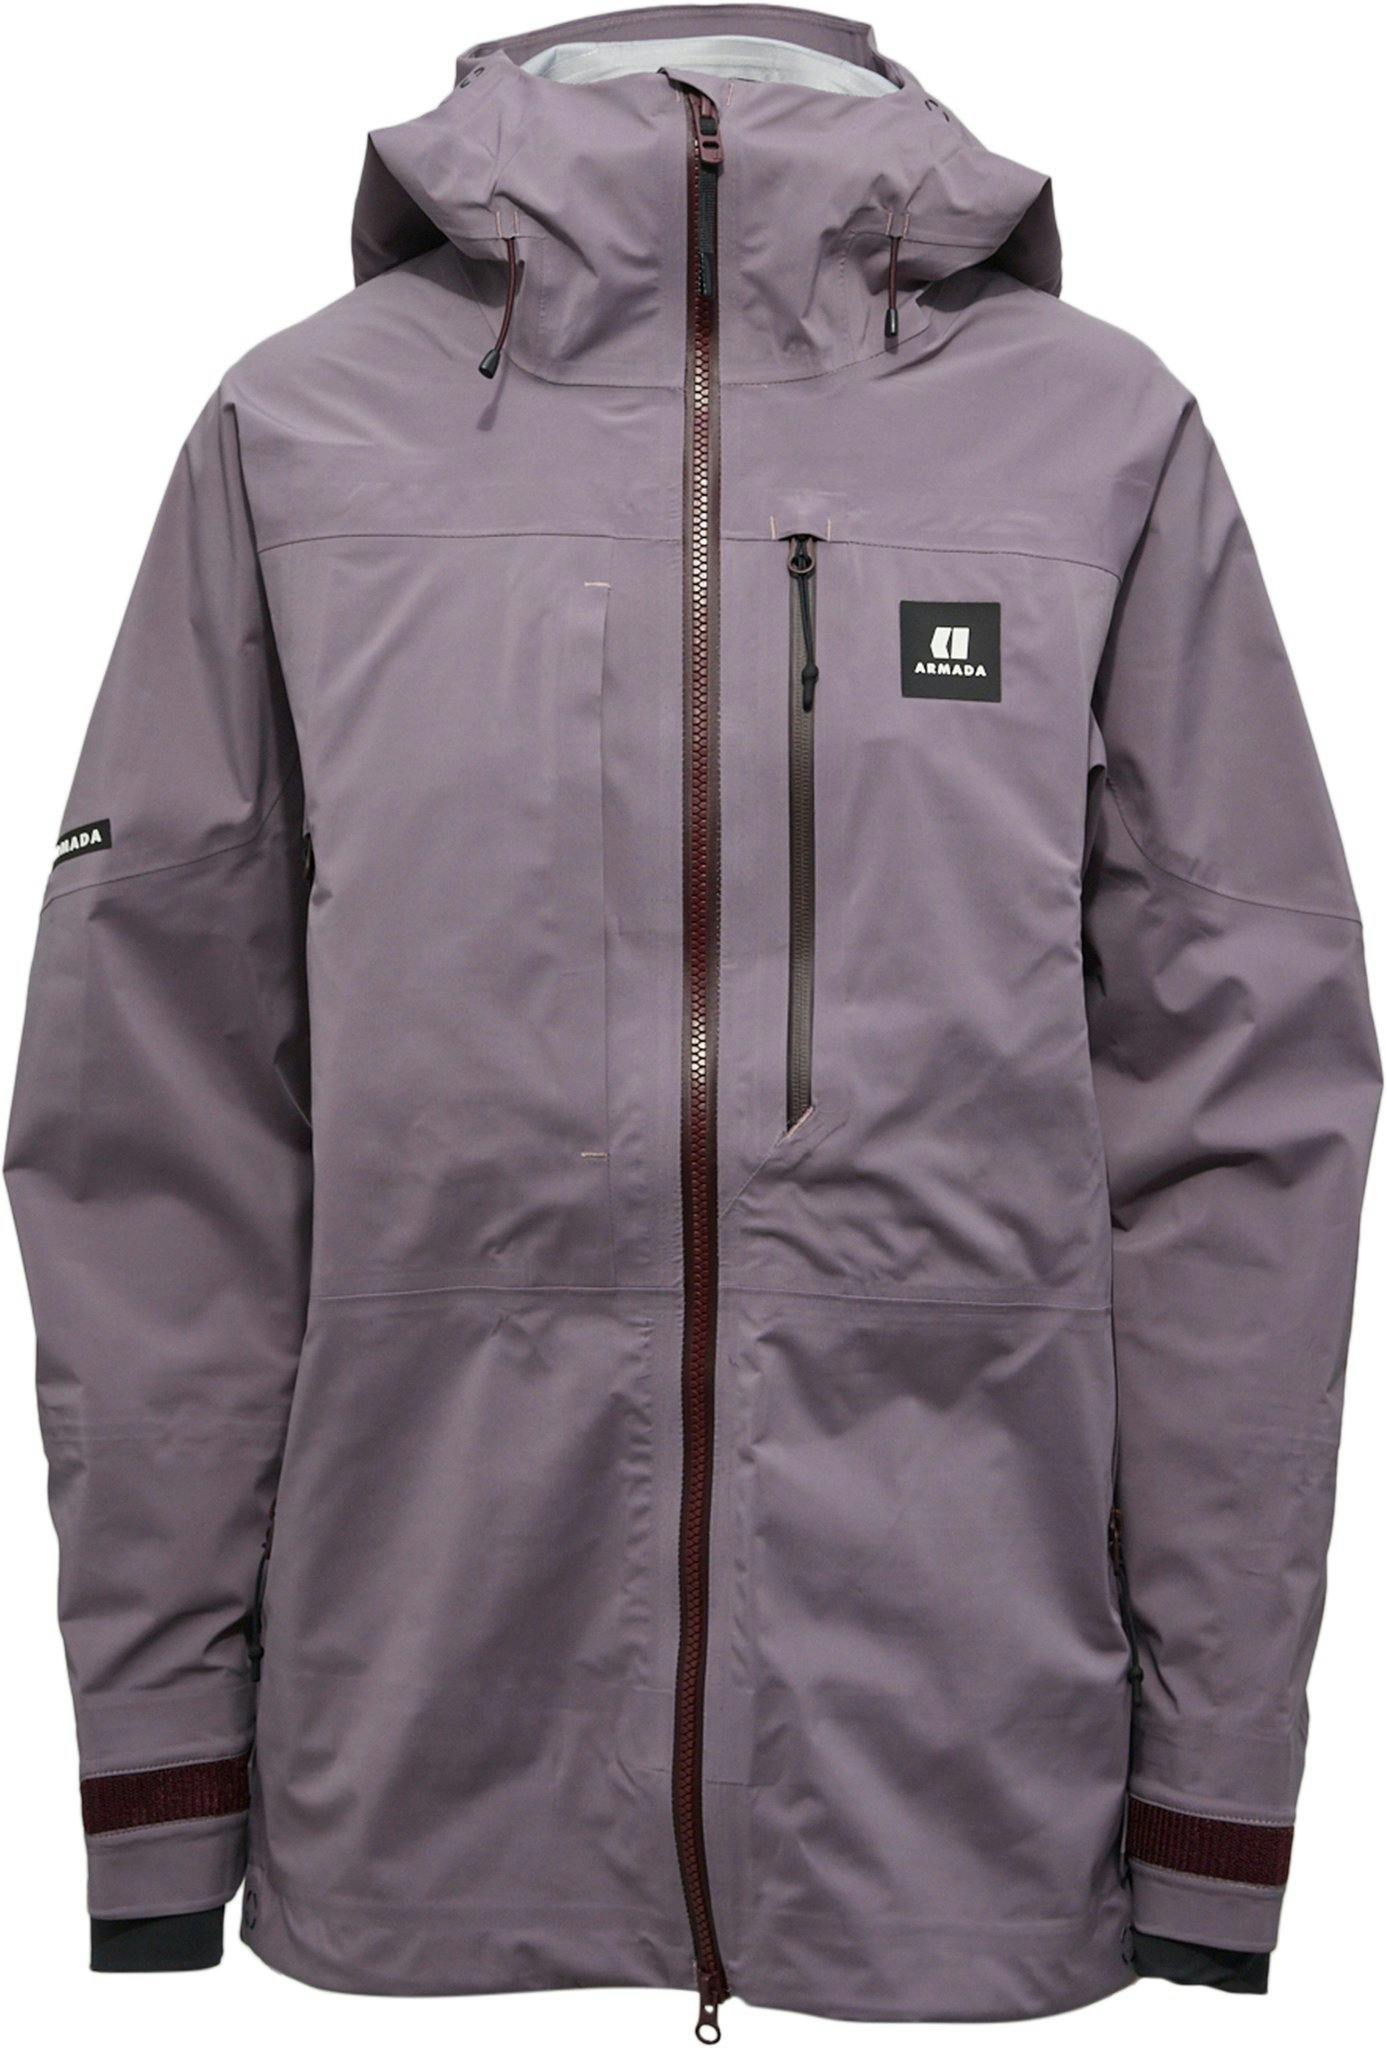 Product image for Pavara 3L Jacket - Women's